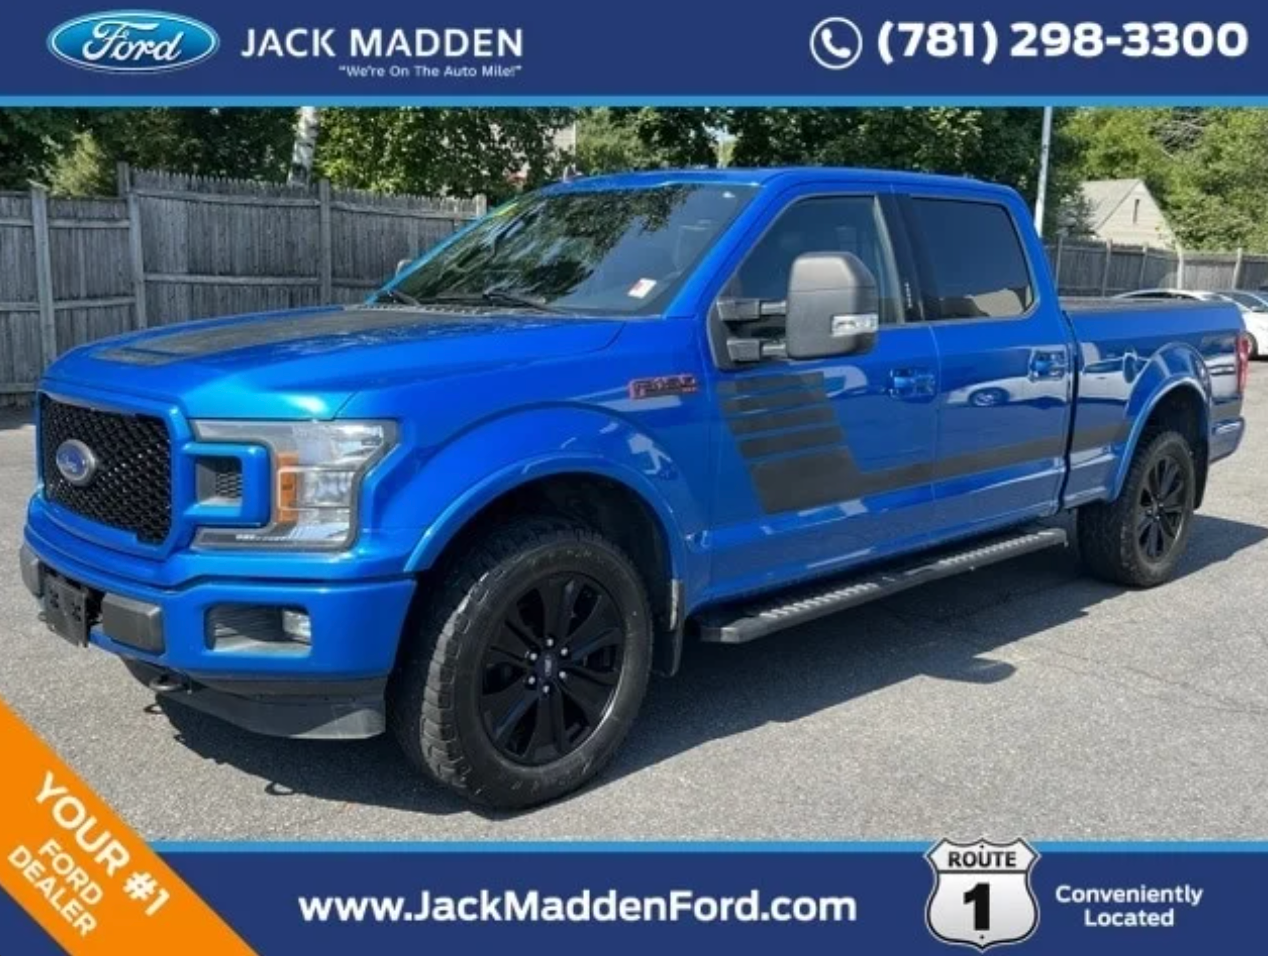 Jack Madden Ford Sales Inc in Norwood MA